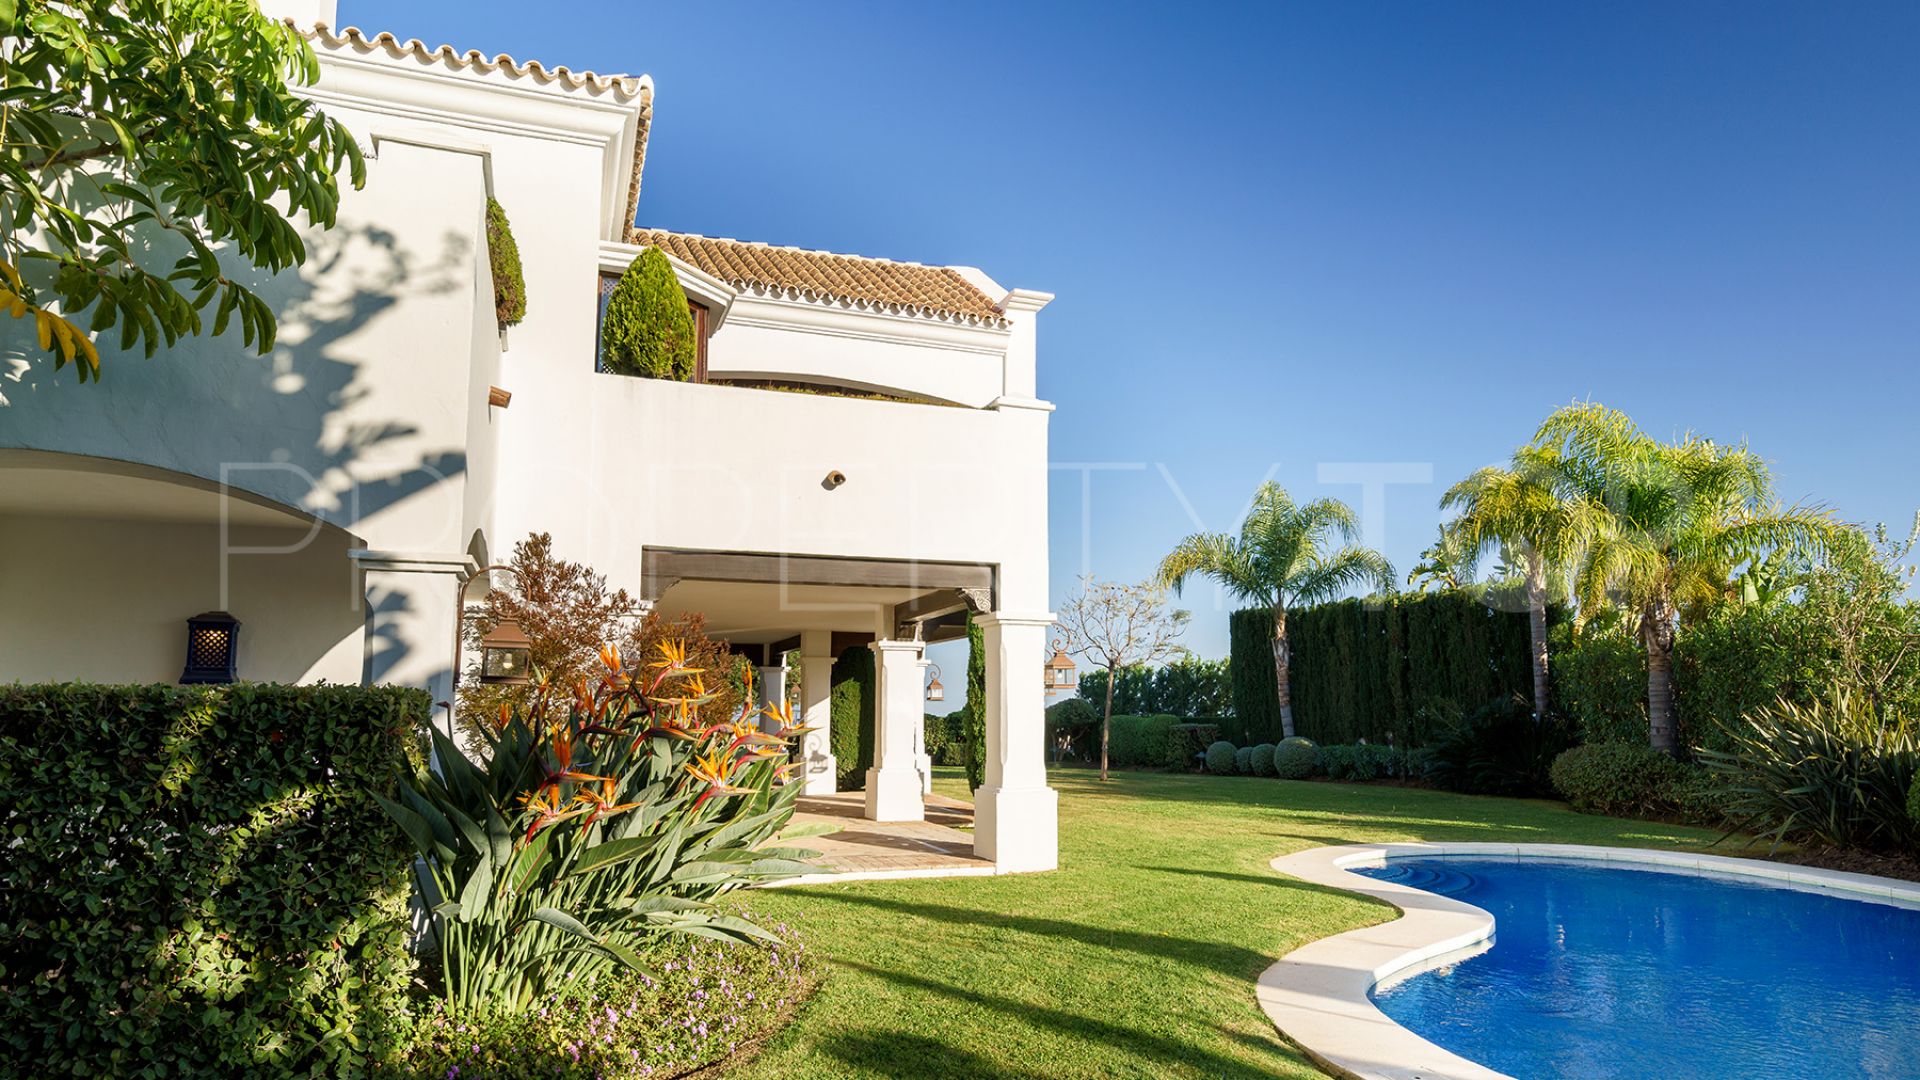 Villa with 5 bedrooms for sale in Capanes Sur